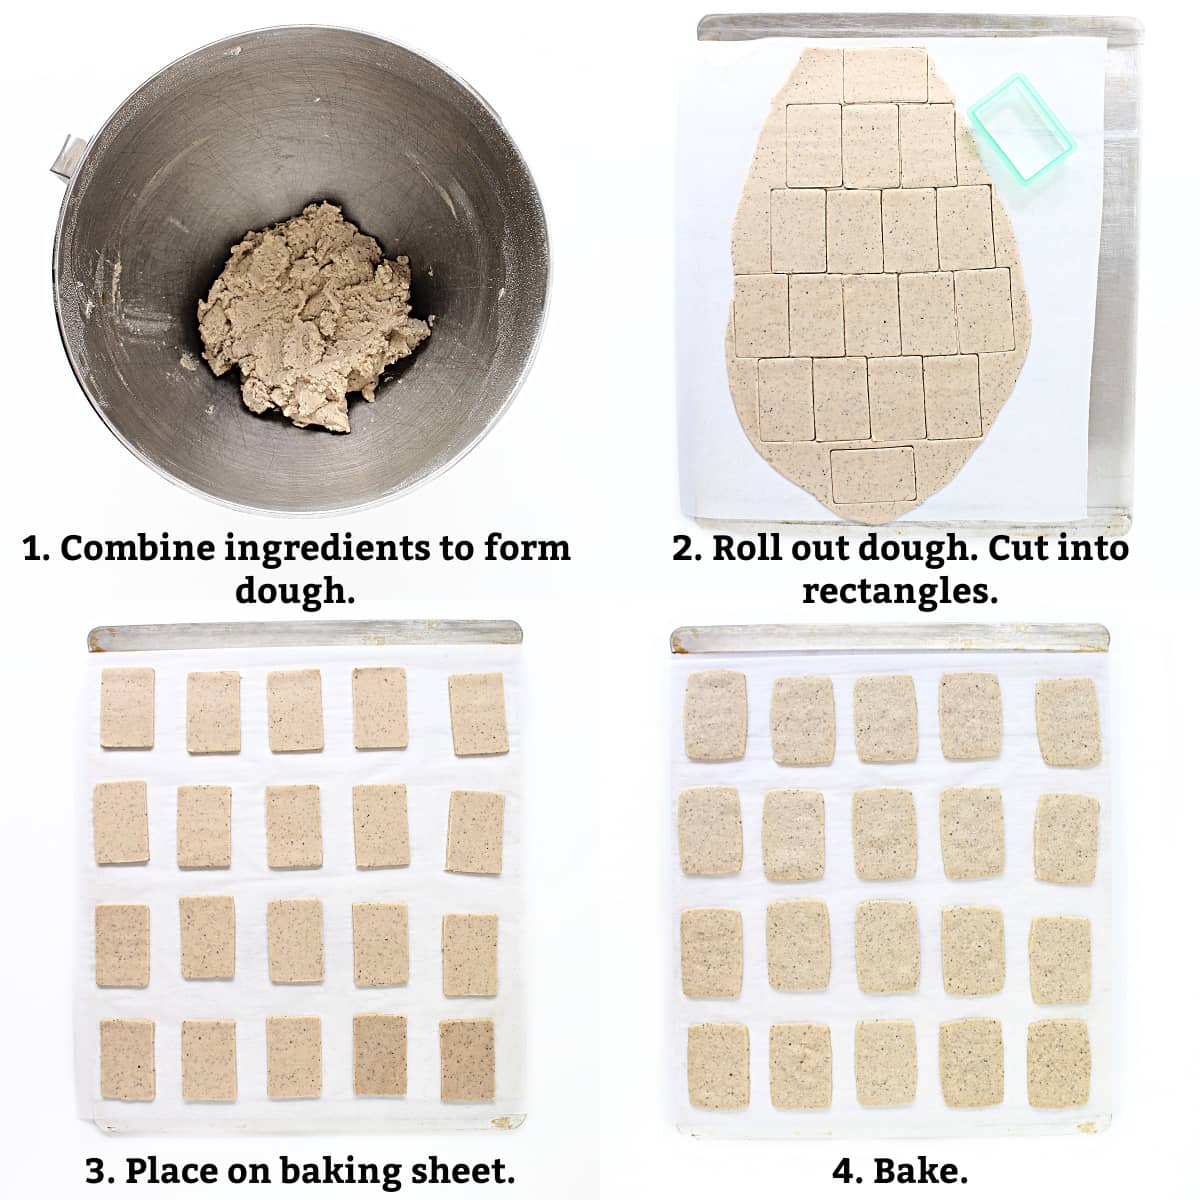 Cookie instructions: mix ingredients, roll out, cut out rectangles, place on parchment lined baking sheet, bake.